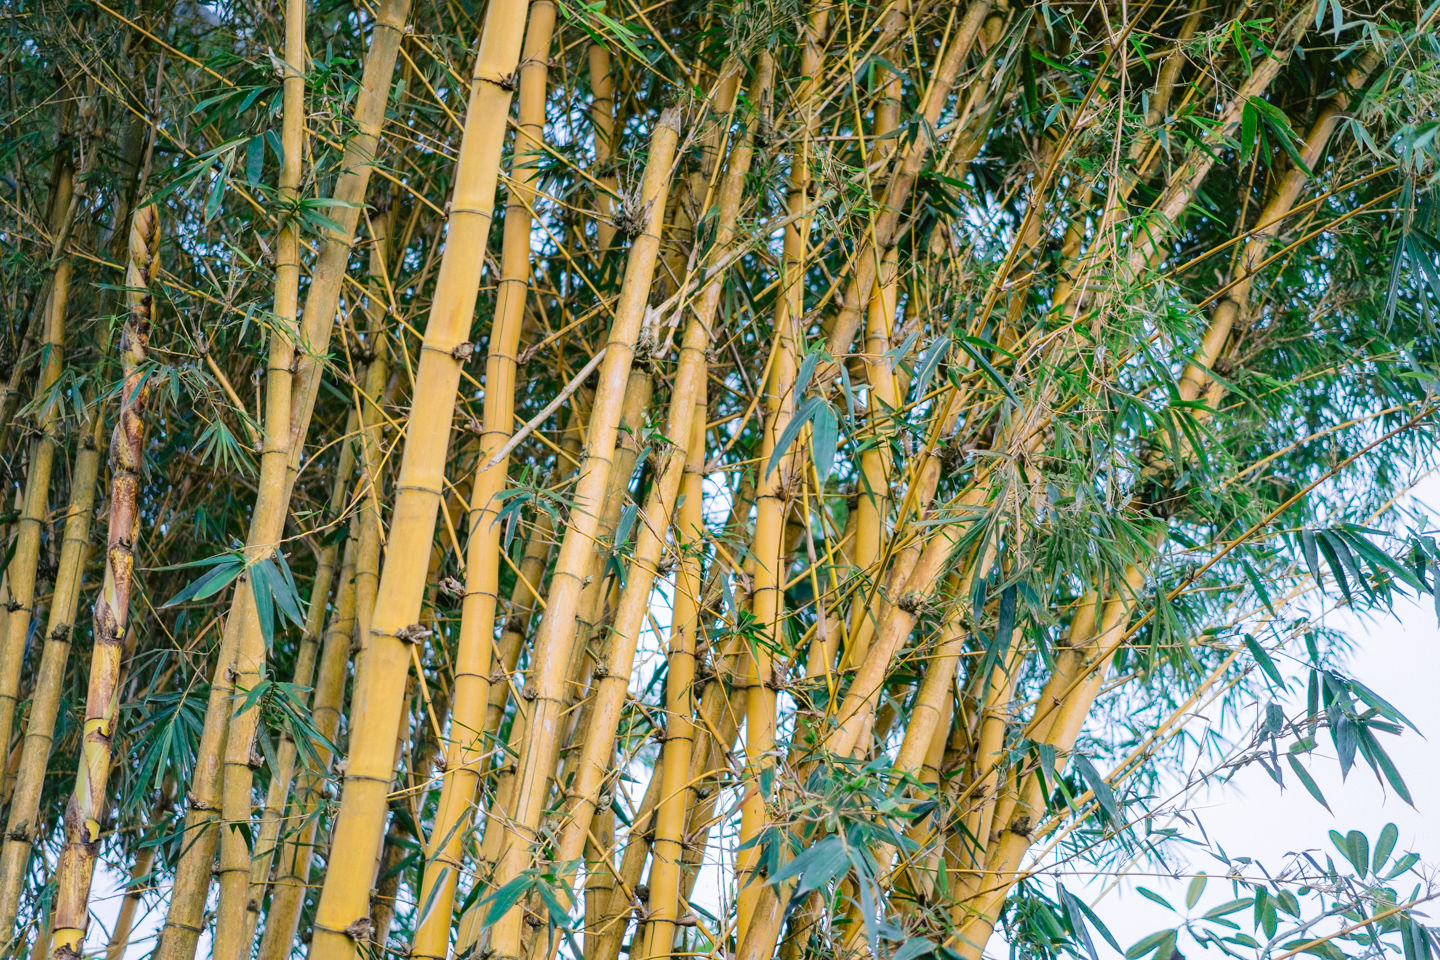 Bamboo tree in the afternoon at Kamandalu Ubud